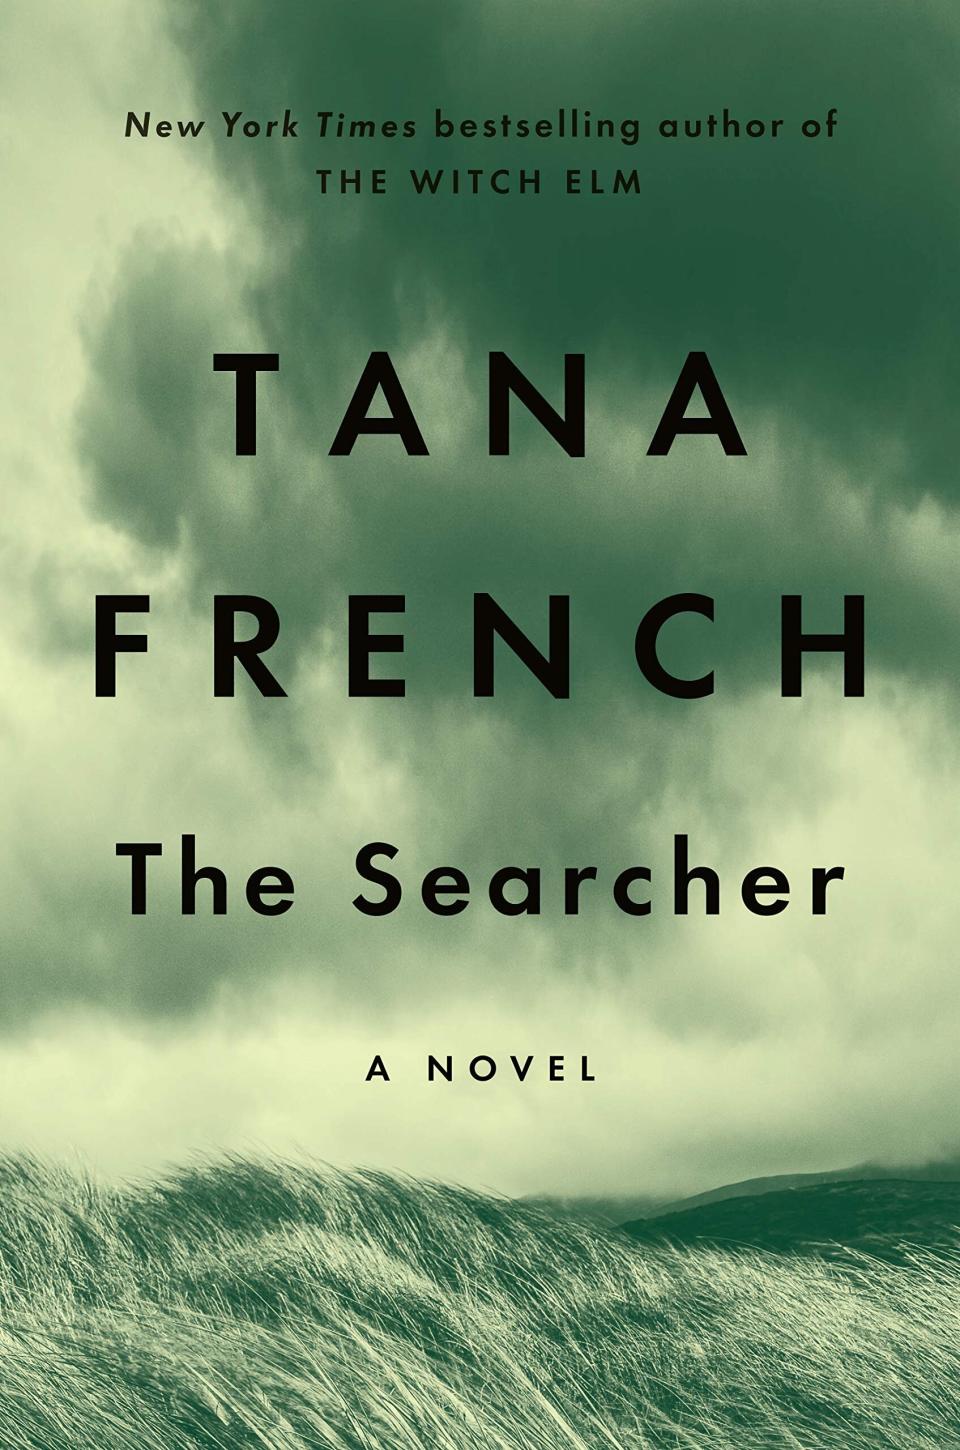 Tana French is back with another thriller in &ldquo;The Searcher.&rdquo; Cal Hooper is a retired detective who decides the best way to put his sleuthing days behind him is to move to a rural village in Ireland, where he&rsquo;ll fix up a small cottage. When a local boy asks Cal for help finding his missing brother, Cal realizes his new small village might be anything but sleepy. Read more about it on <a href="https://www.goodreads.com/book/show/52661162-the-searcher" target="_blank" rel="noopener noreferrer">Goodreads﻿</a> and grab a copy on <a href="https://amzn.to/36qTWKT'" target="_blank" rel="noopener noreferrer">Amazon</a> or <a href="https://fave.co/3jrdcvg" target="_blank" rel="noopener noreferrer">Bookshop</a>. <br /><br /><i>Expected release date: October 6</i>